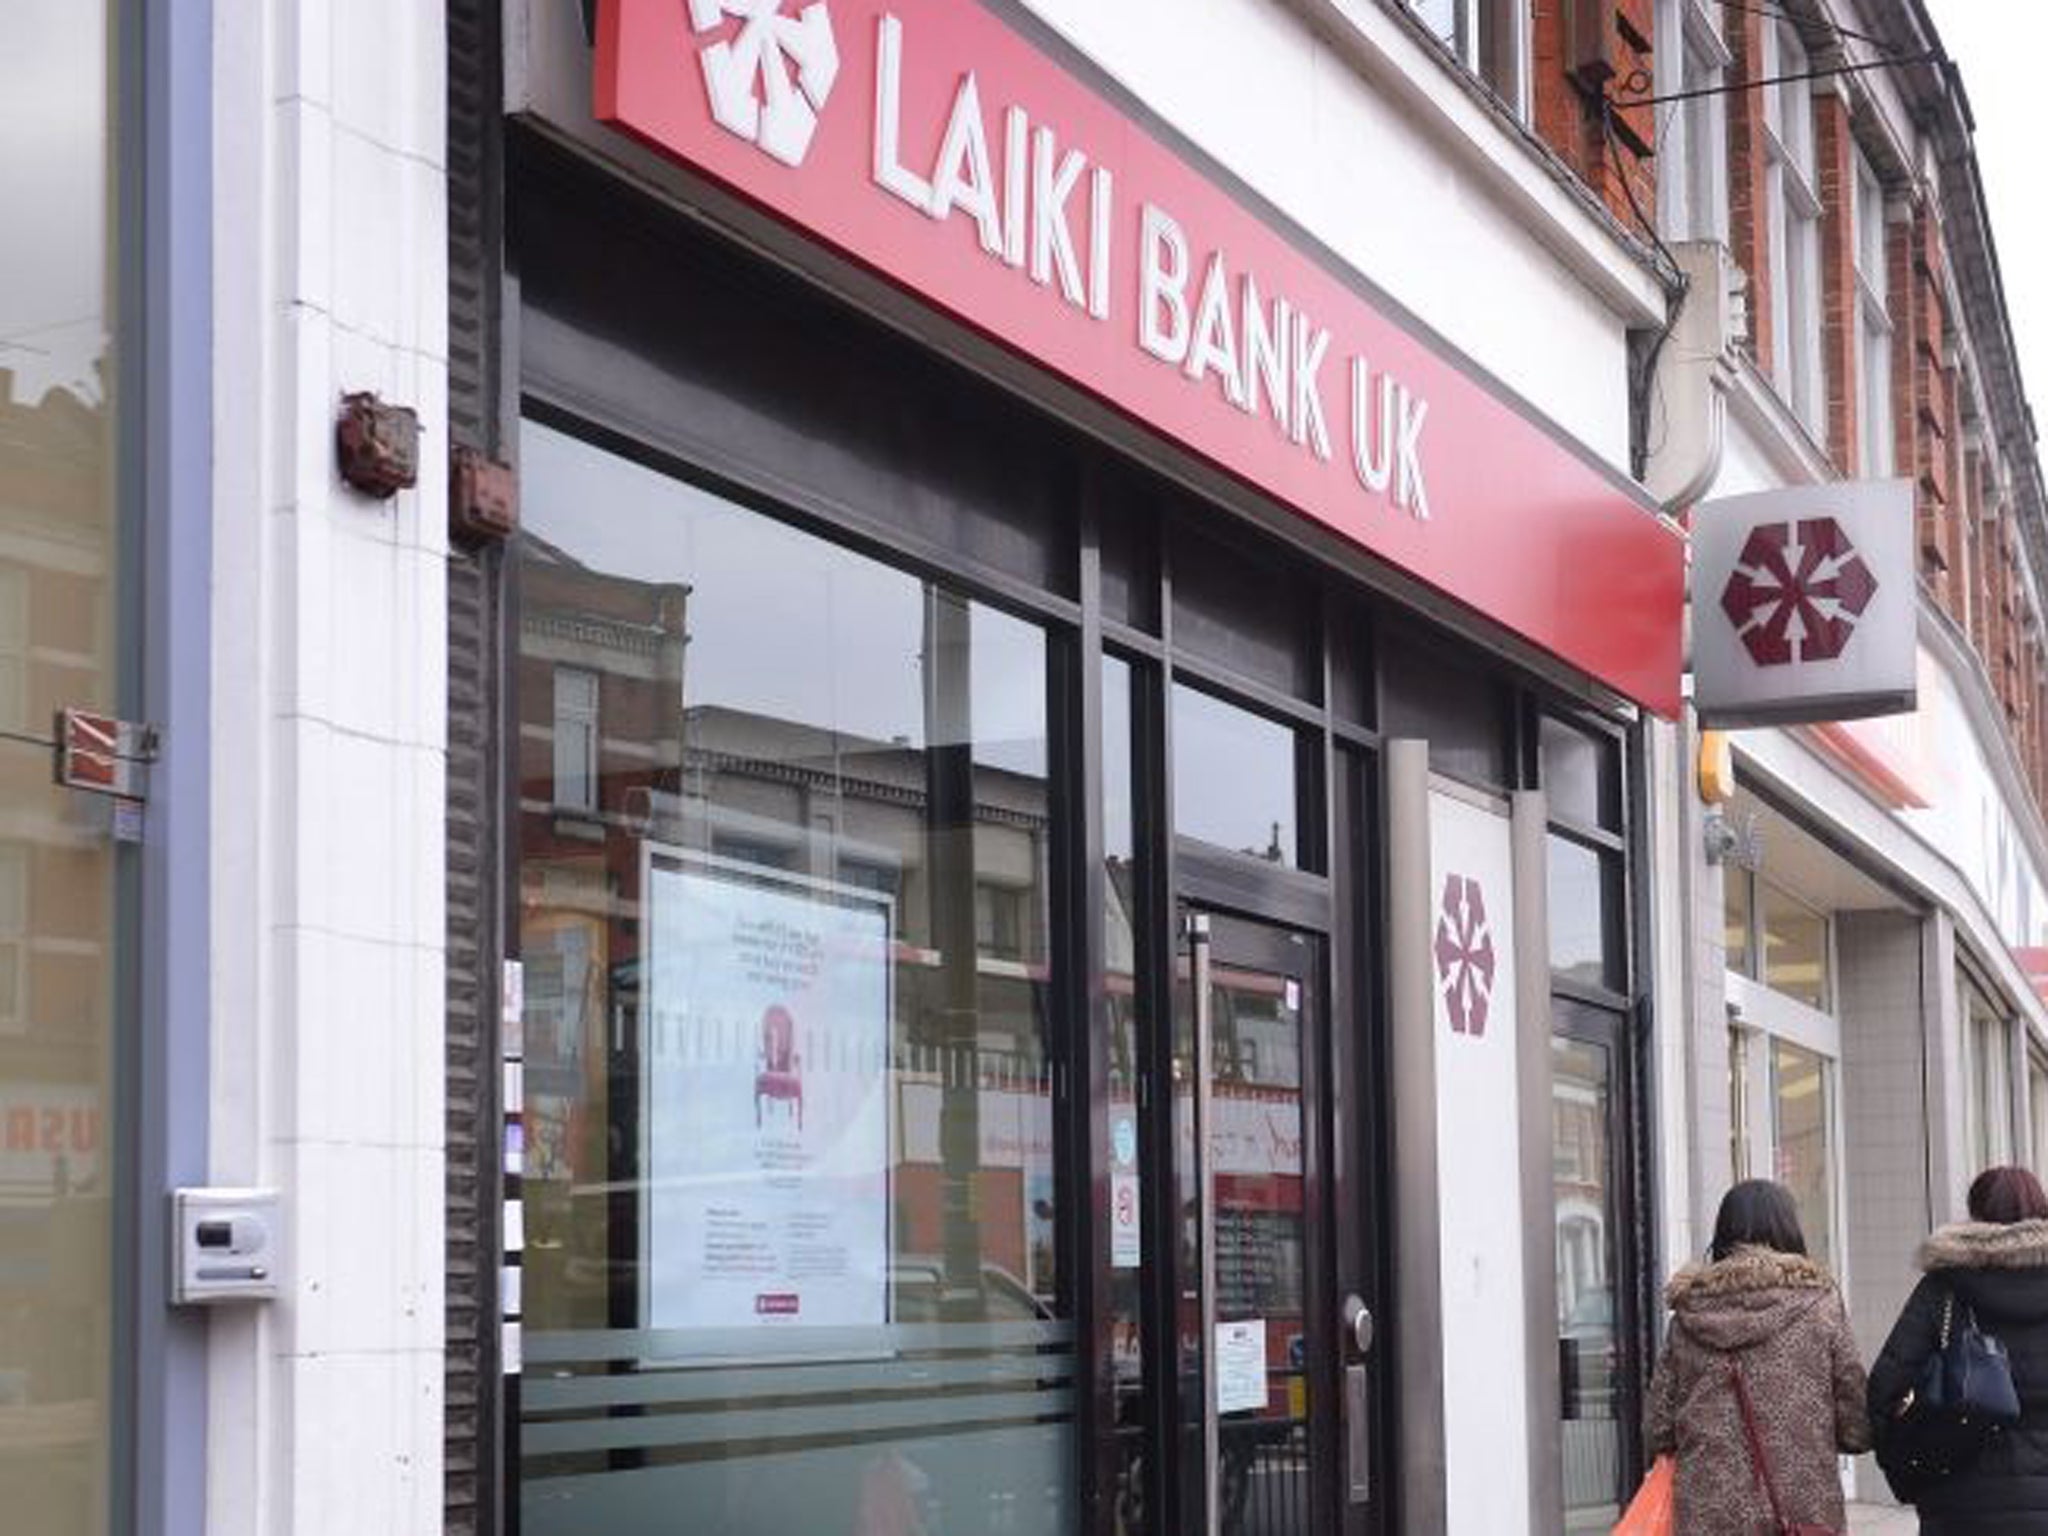 A Laiki branch in Palmers Green, north London